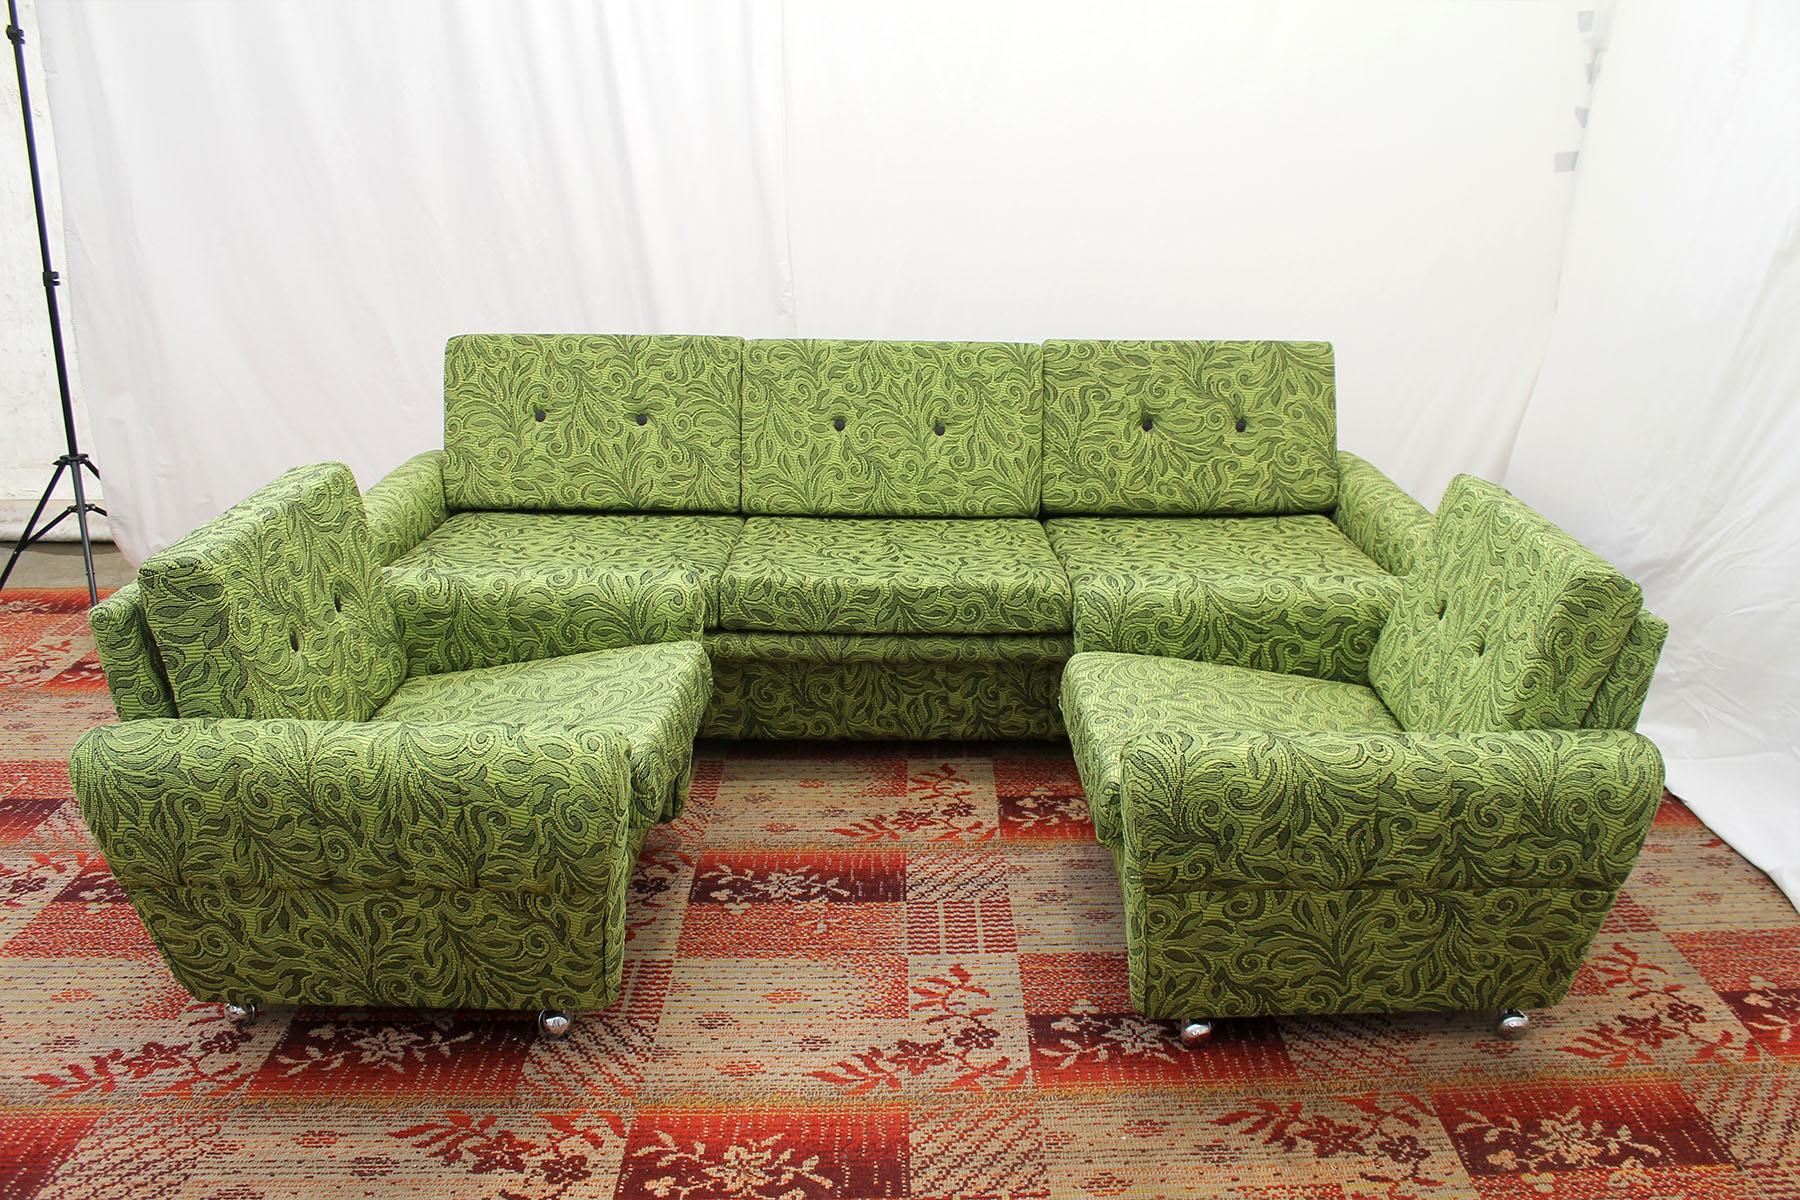 Eastern Bloc Vintage Living Room Set, Czechoslovakia, 1980s In Good Condition In Prague 8, CZ